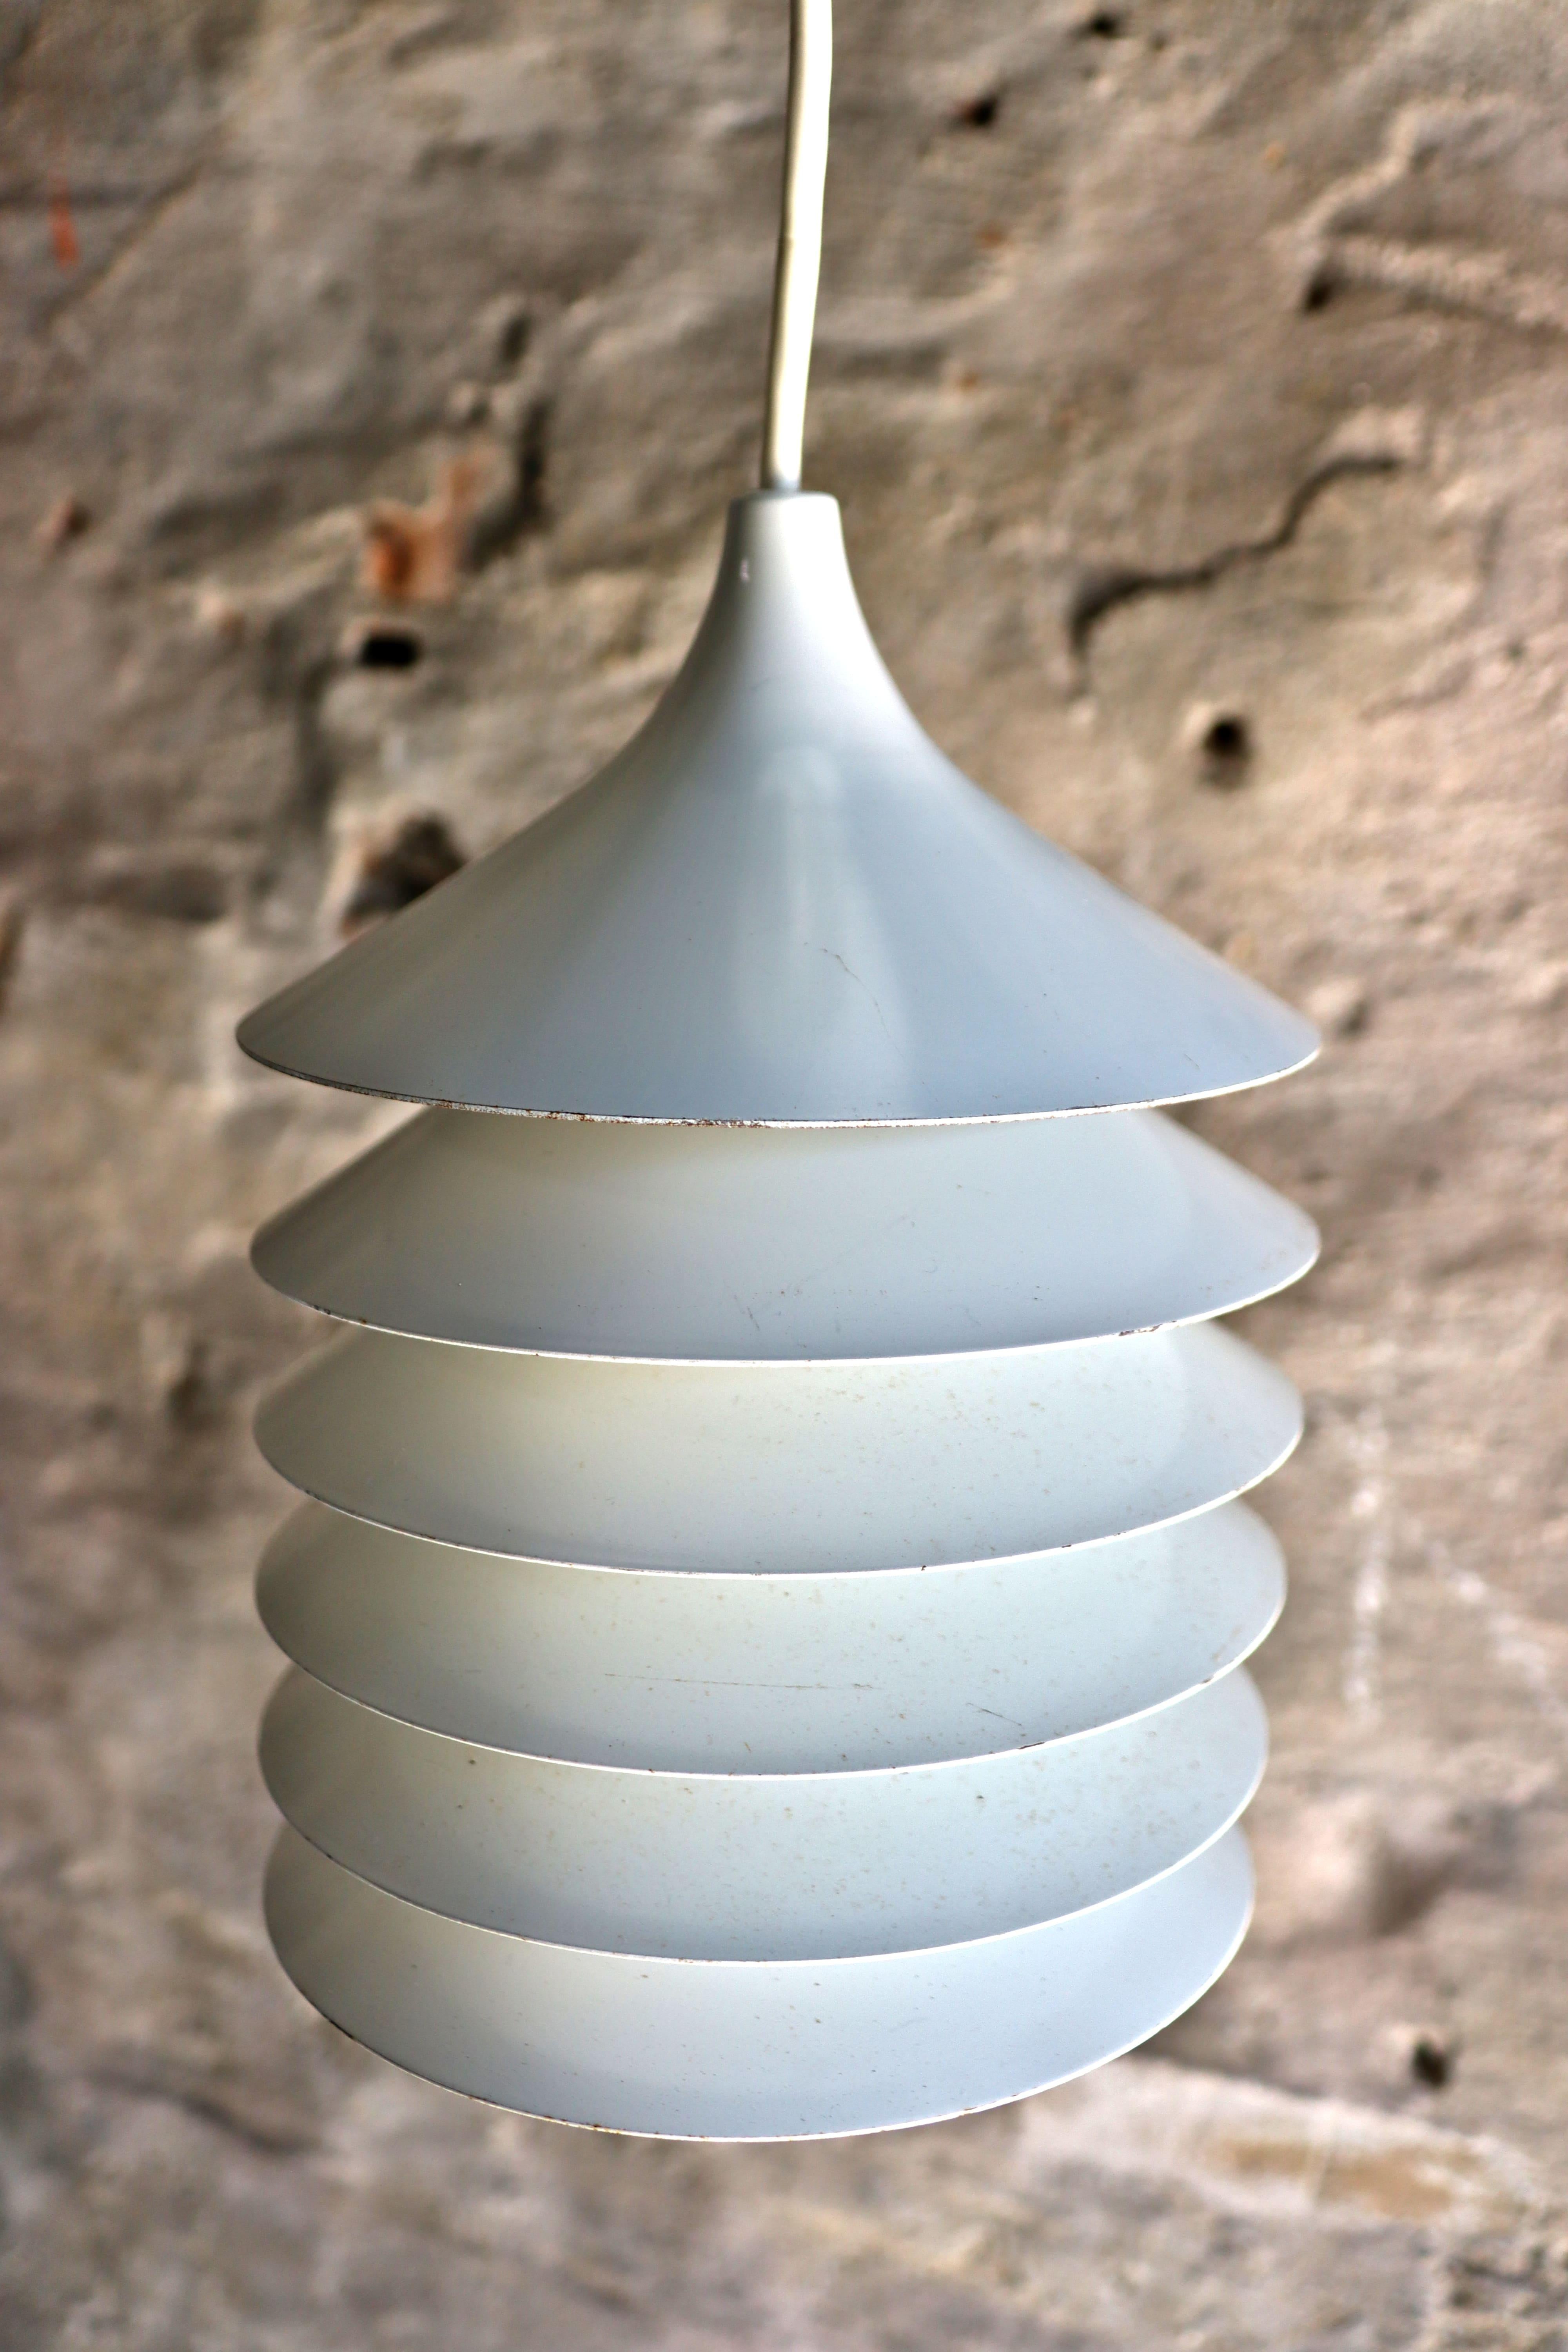 Materials: White round metal (aluminium) stacking discs lampshade. Painted all white.
Period: 1980s.
Designer: Bent Gantzel-Boysen in 1983.
Manufacturer: IKEA
Other versions: The IKEA Duett pendant lamp exists in white, blue, red, green and